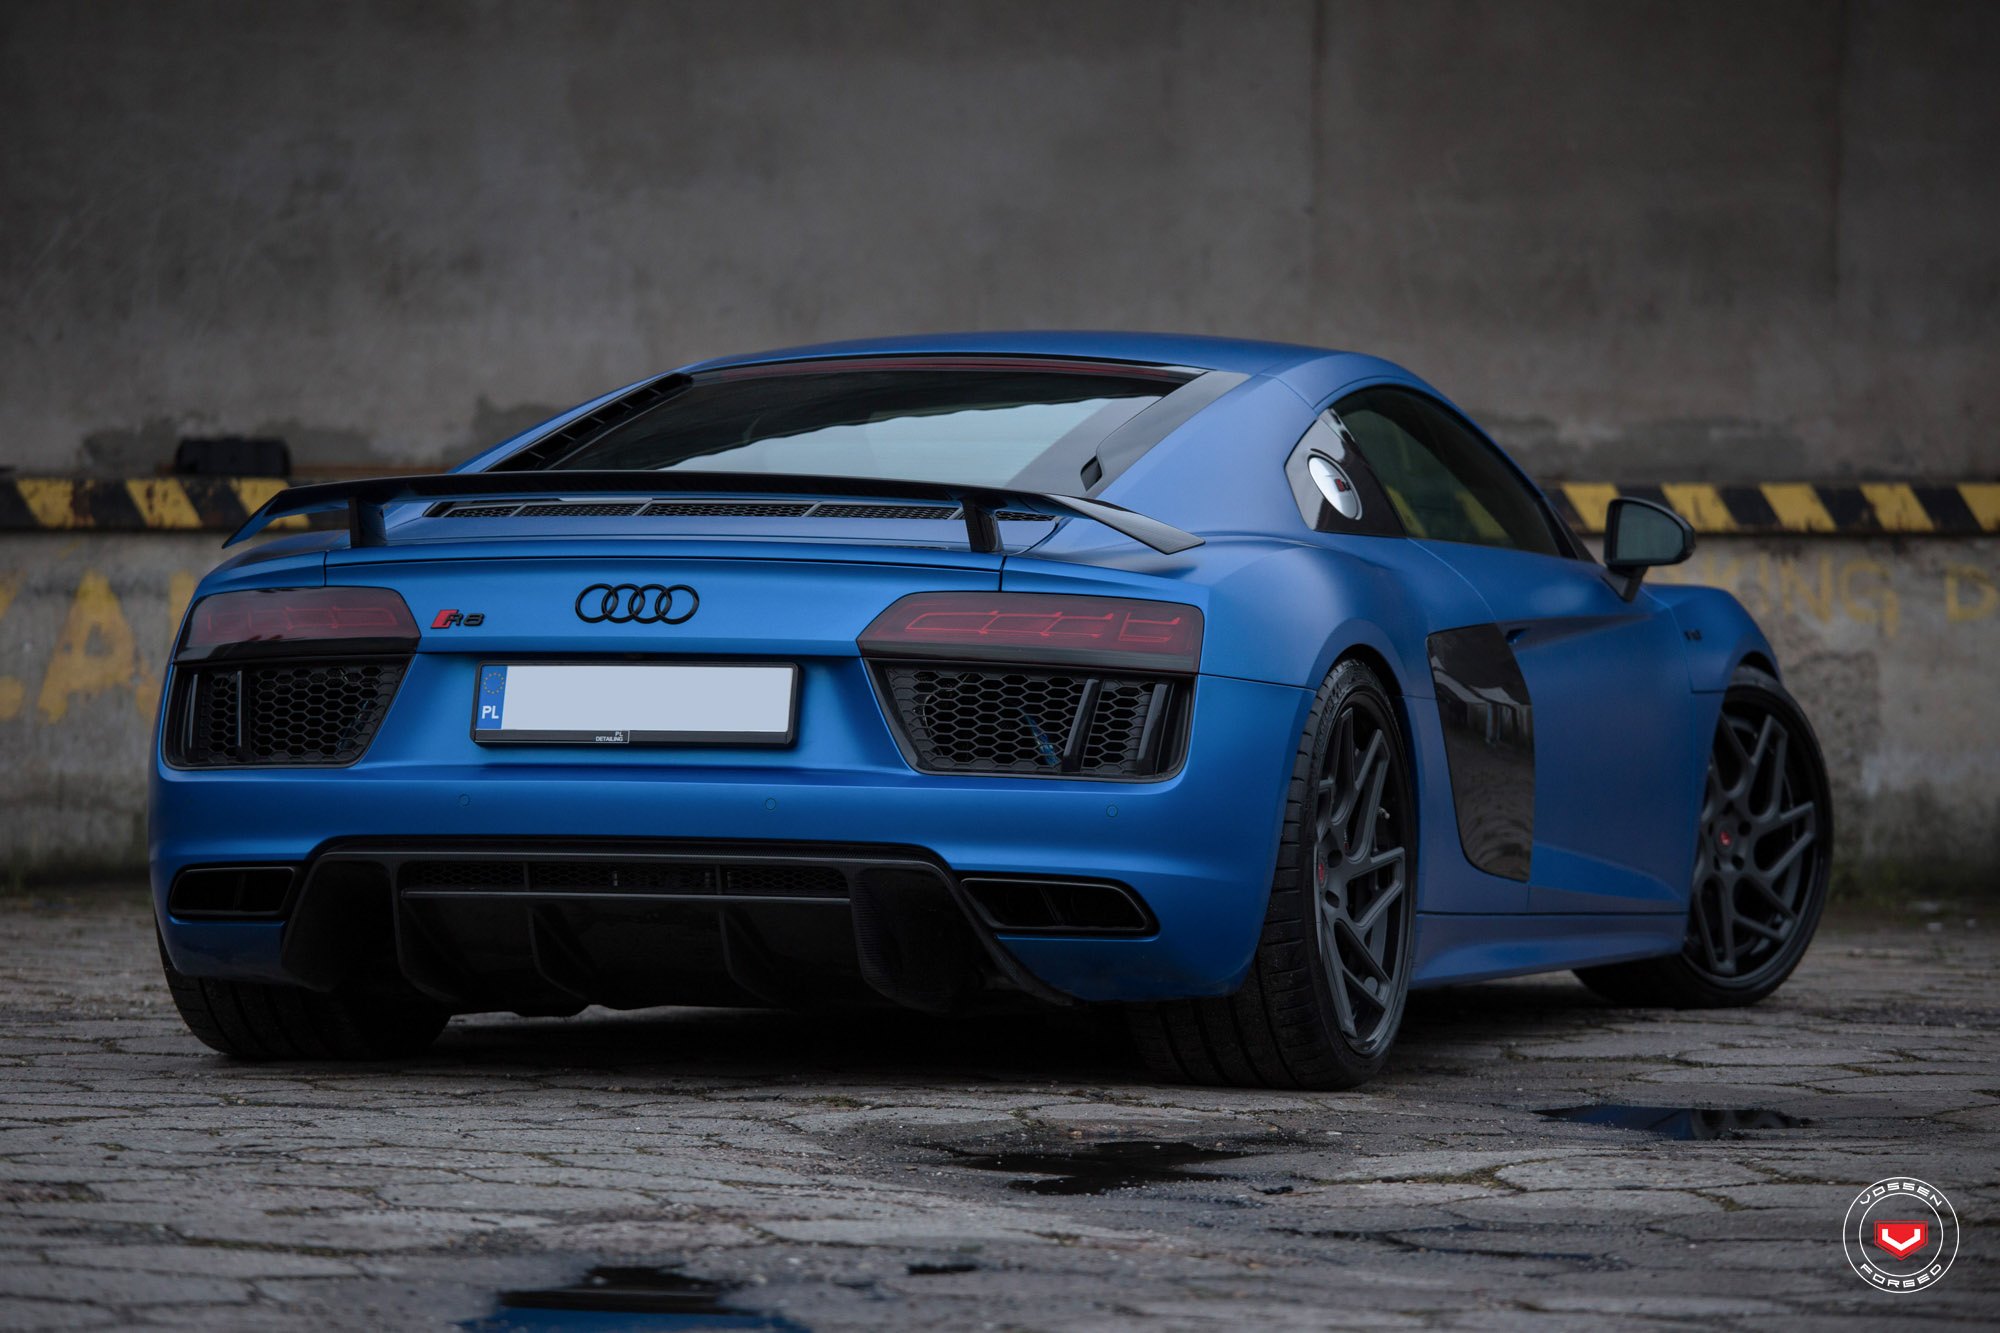 Matte Blue Audi R8 with Red Smoke Taillights - Photo by Vossen Wheels